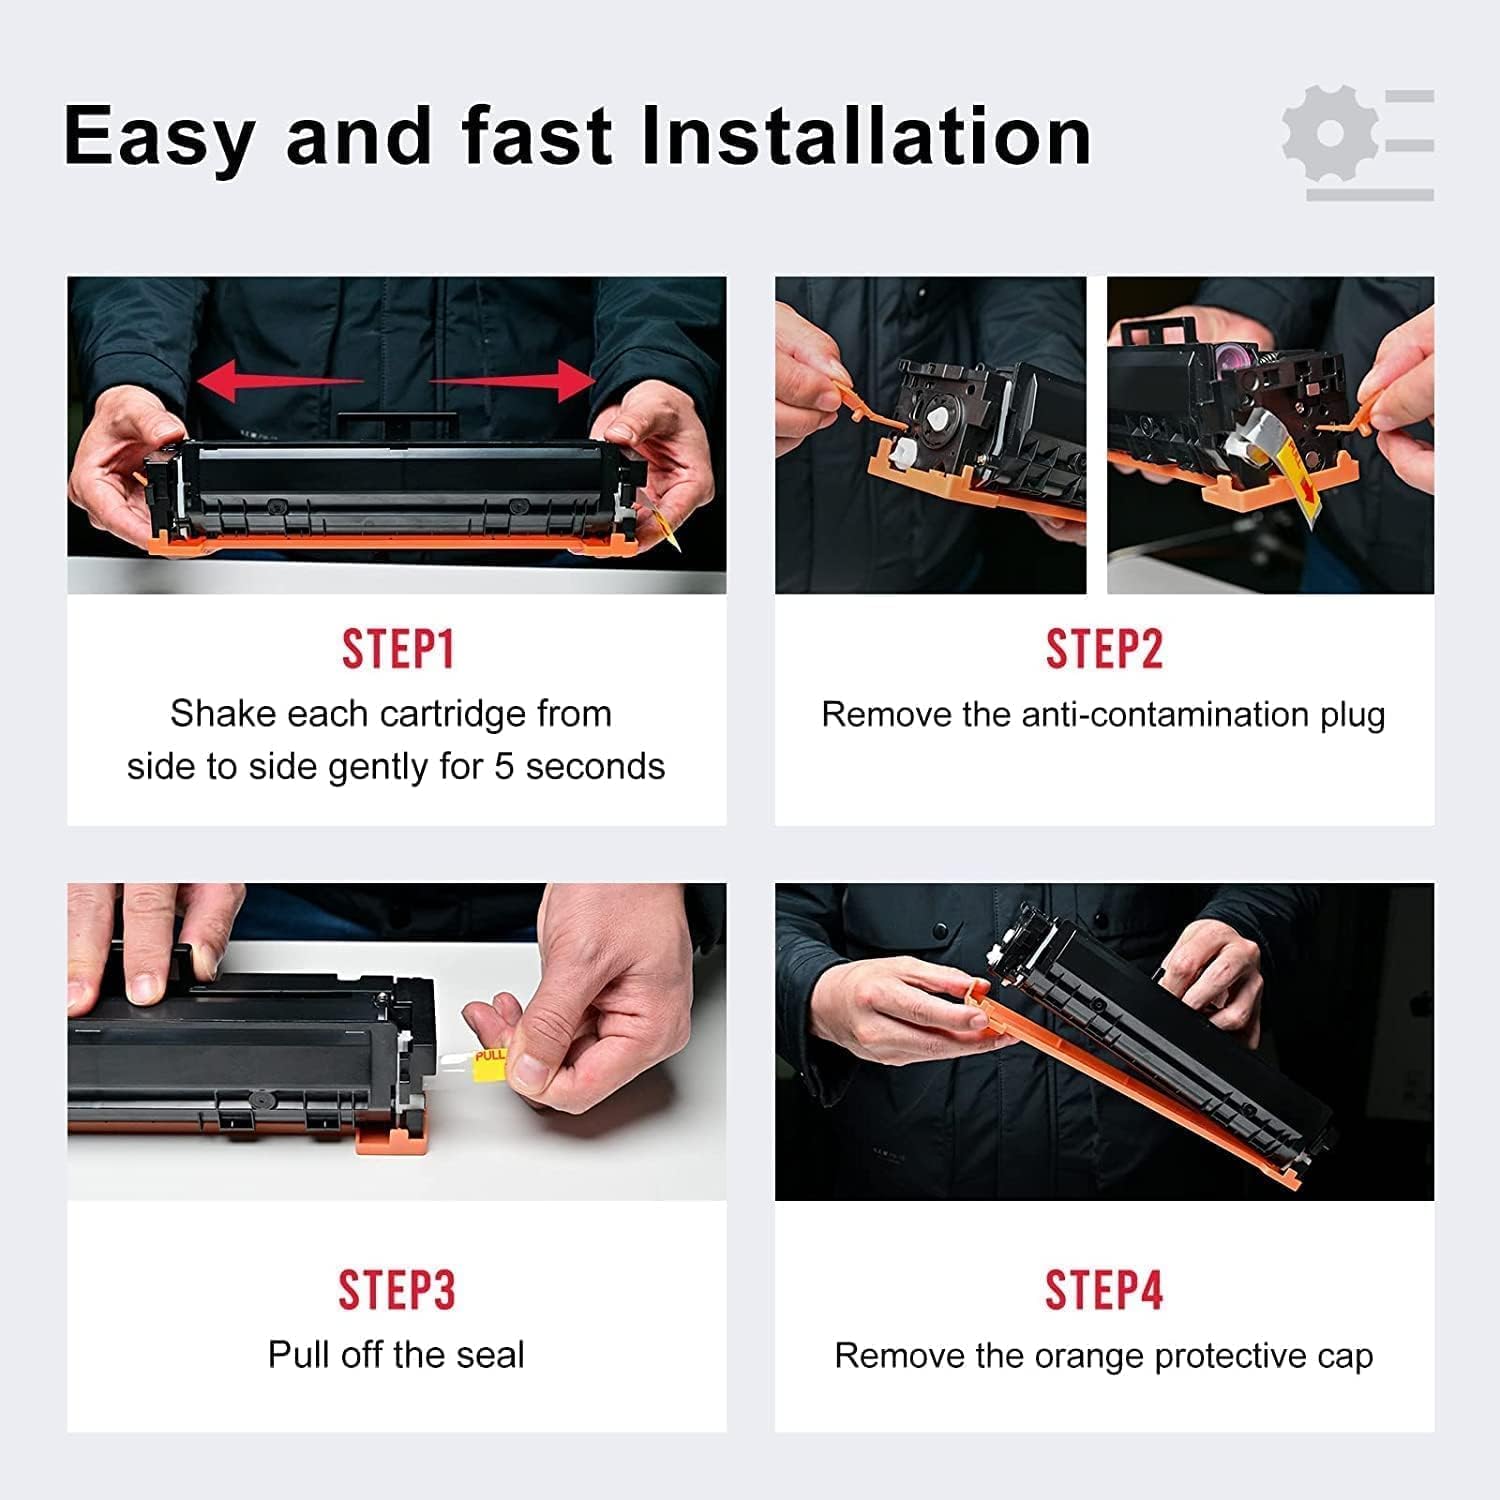 Easy and Fast Installation: Step-by-step visual guide on how to easily and quickly install LEMERO toner cartridges, including shaking, removing plugs and seals, and handling tips to prevent contamination.